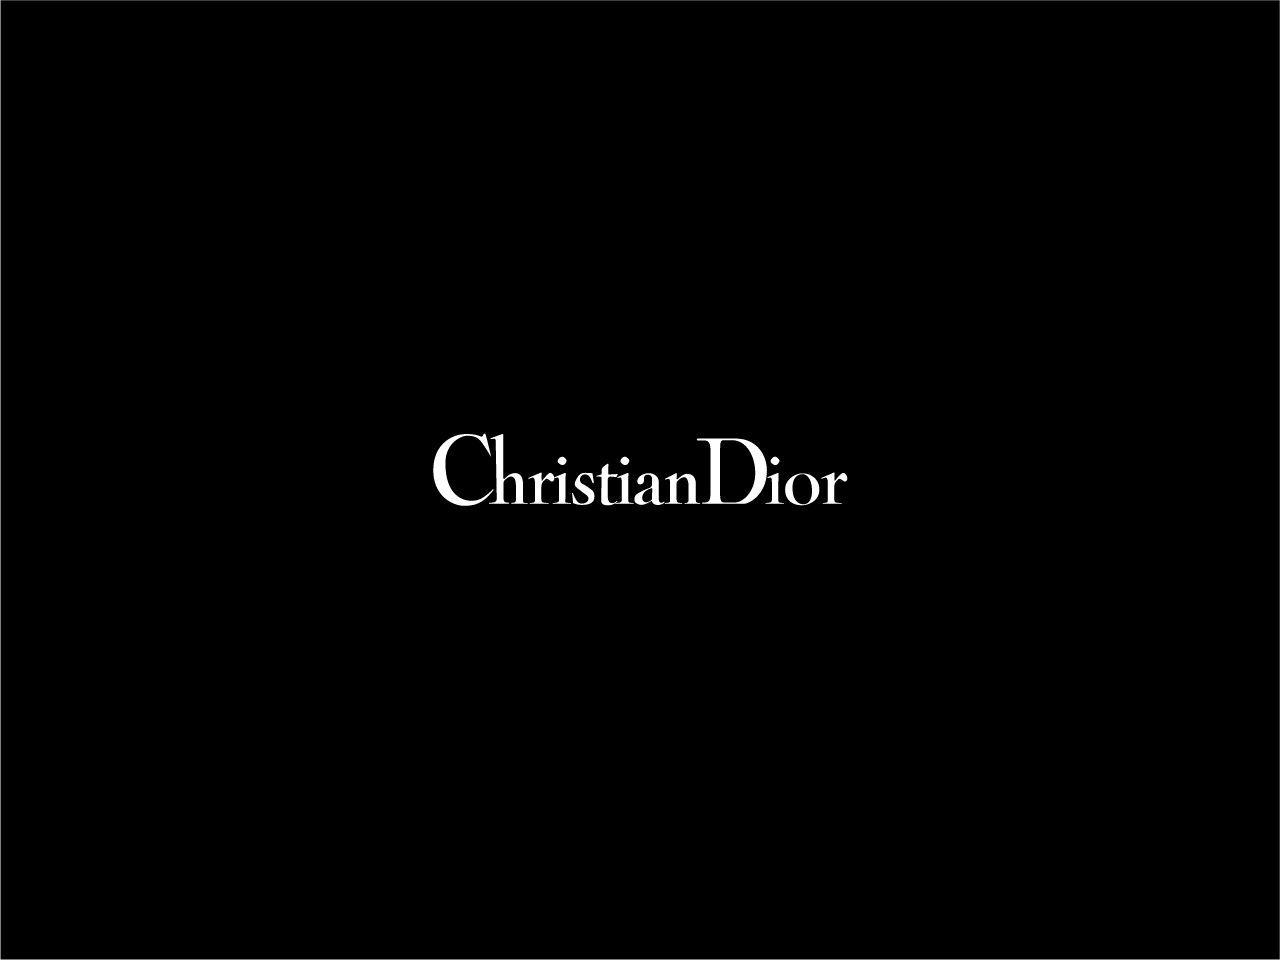 Christian Dior Wallpapers Top Free Christian Dior Backgrounds Wallpaperaccess